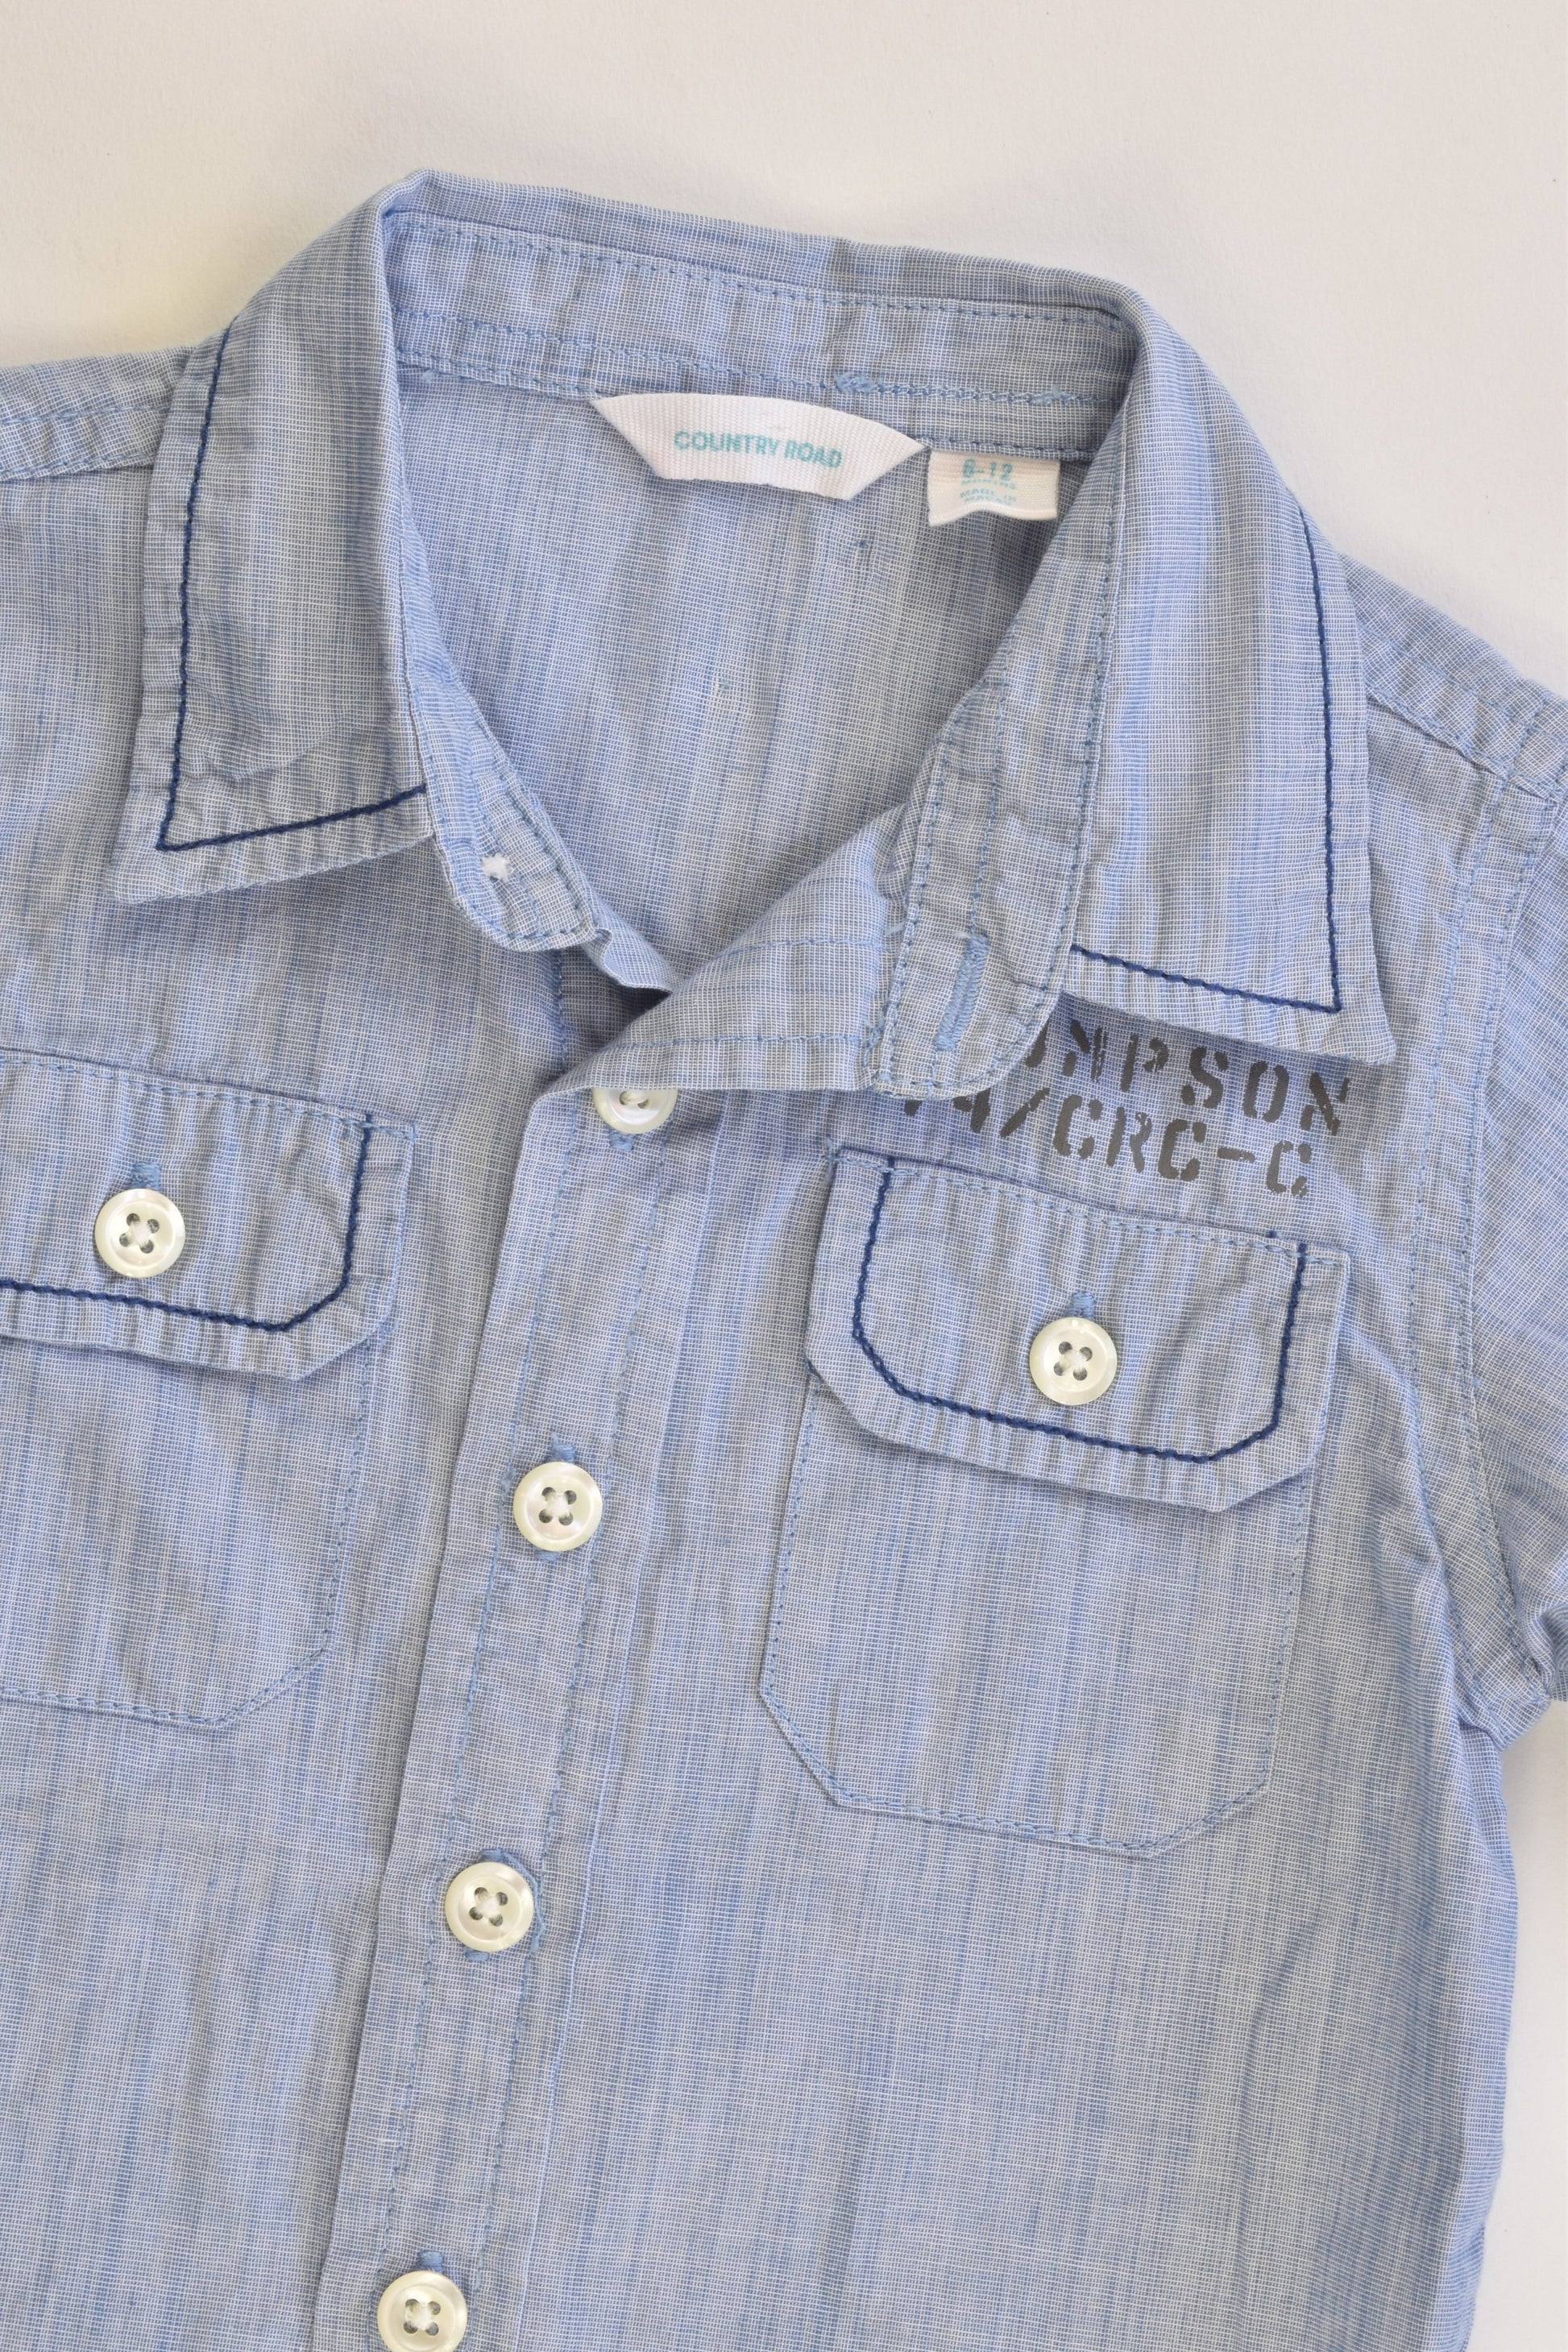 Country Road Size 6-12 months Casual Collared Shirt